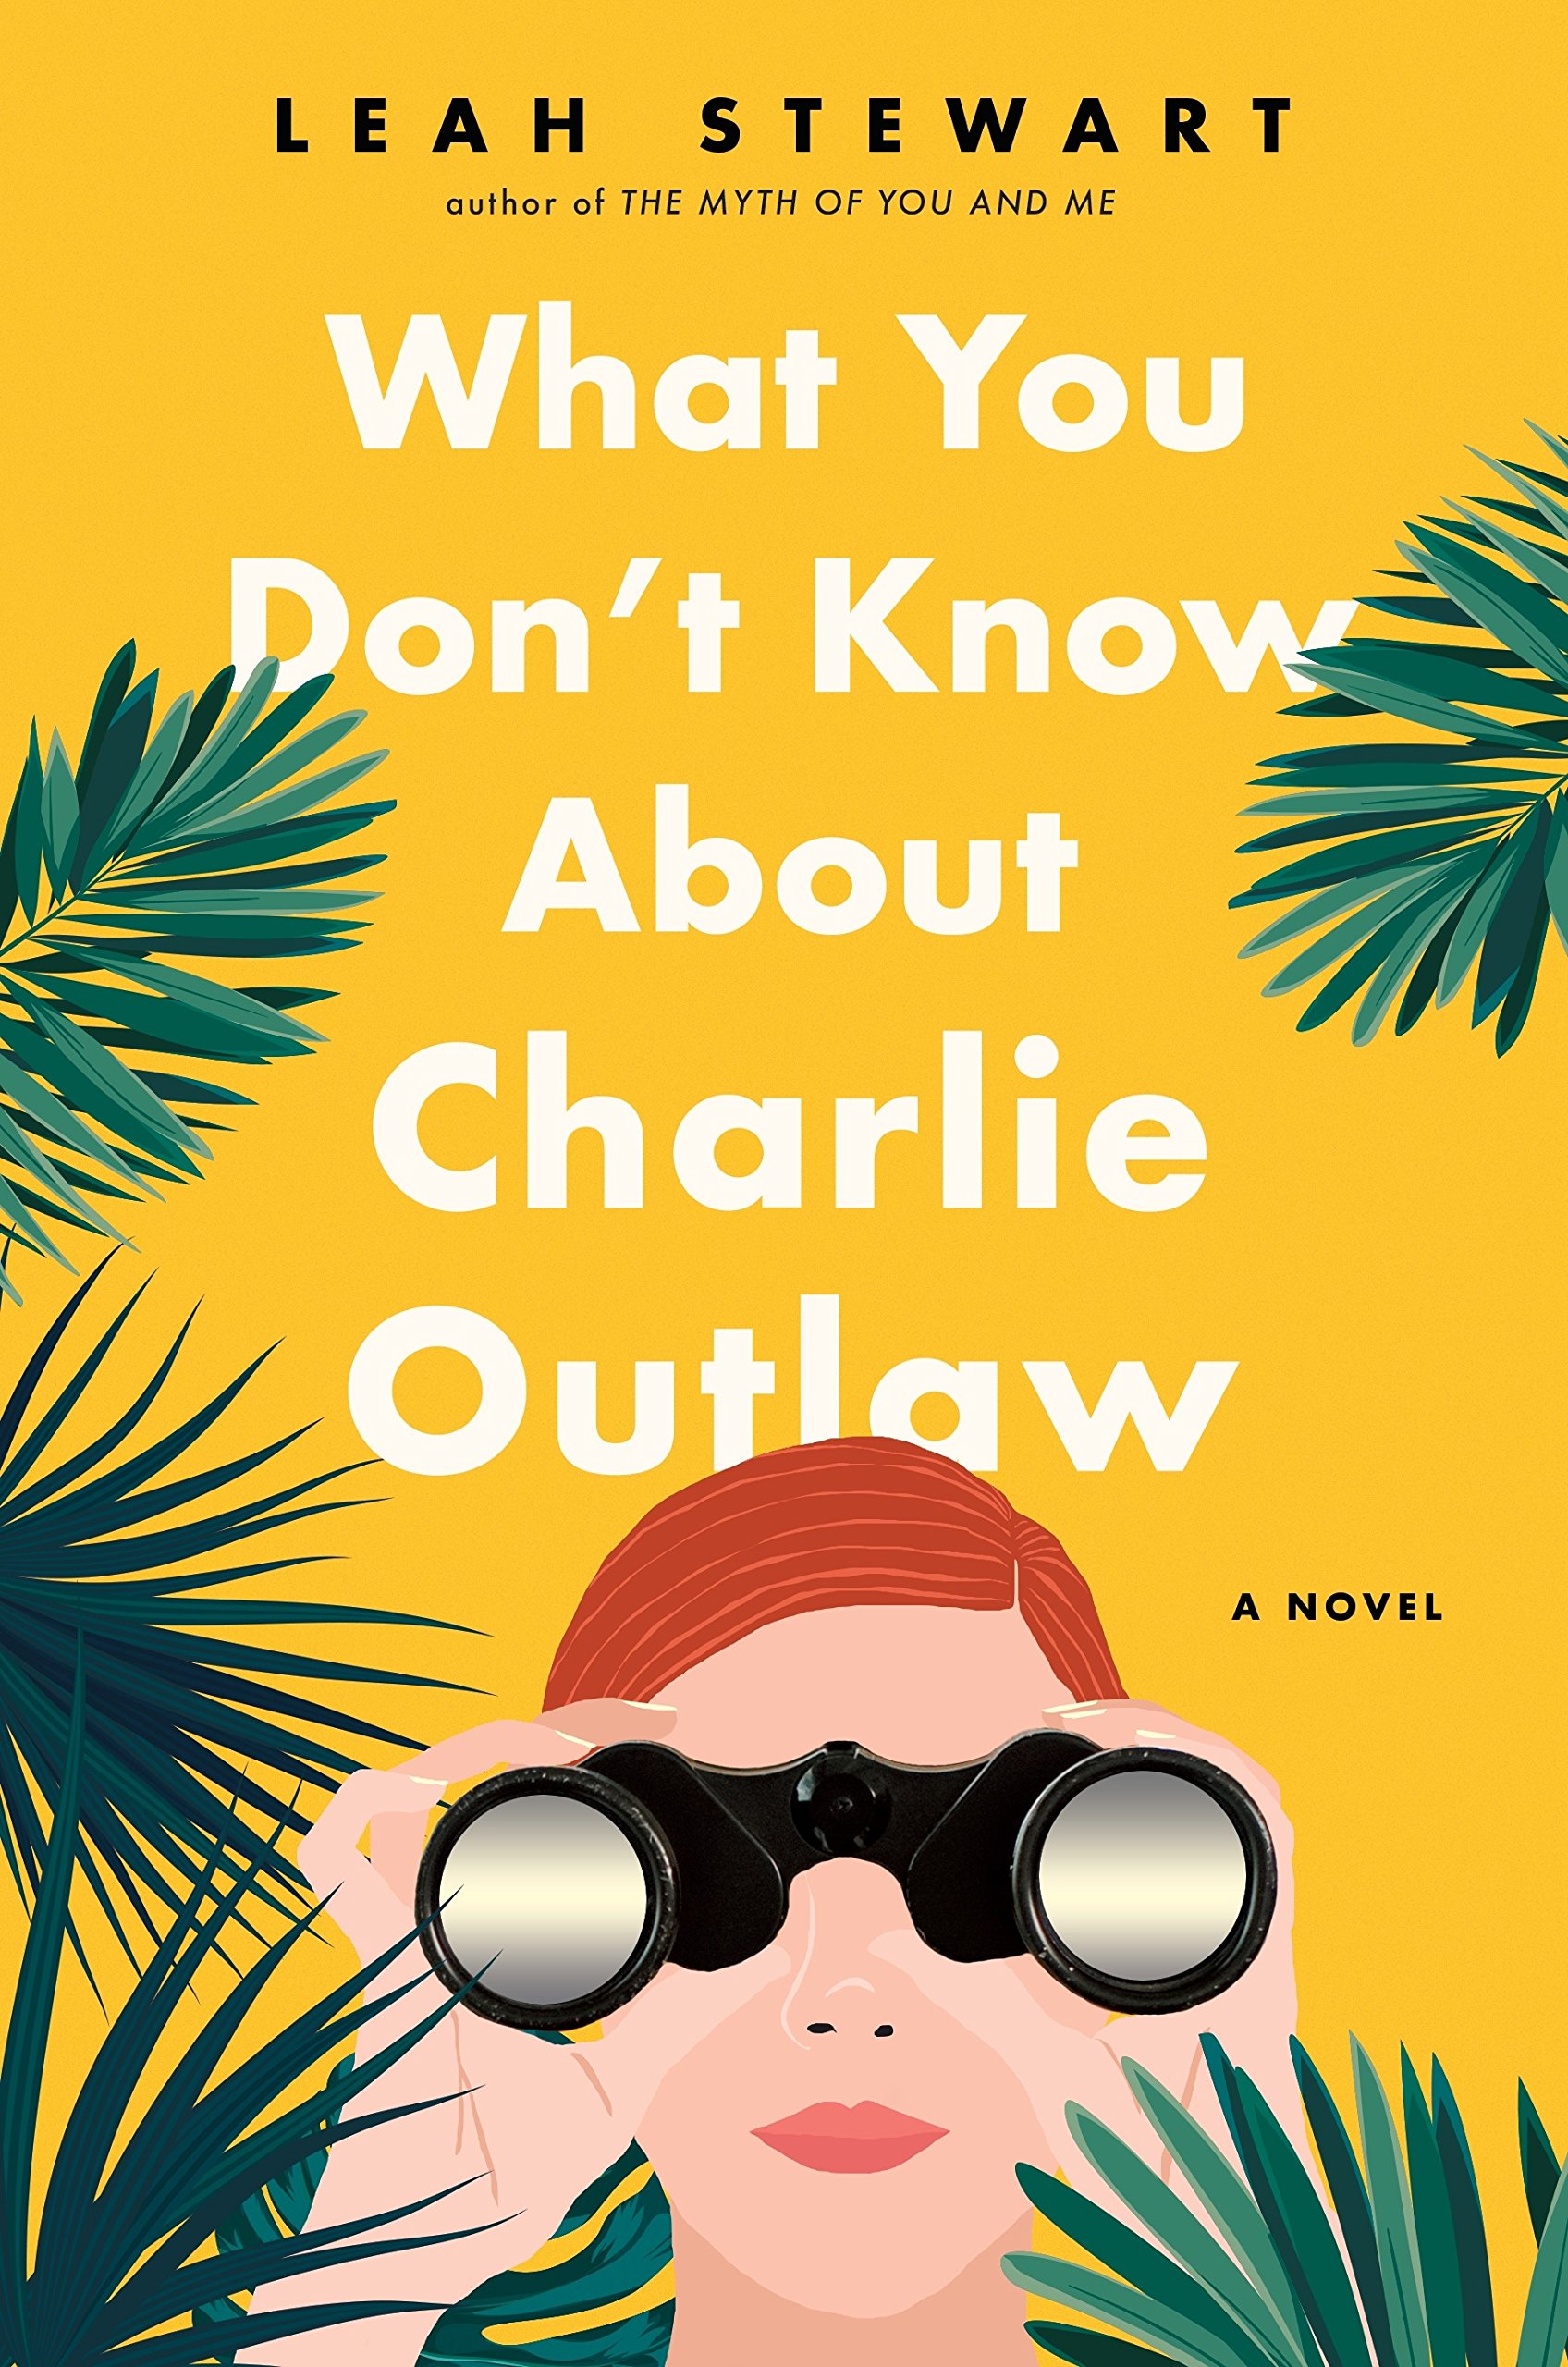 what you don't know about charlie outlaw.jpg